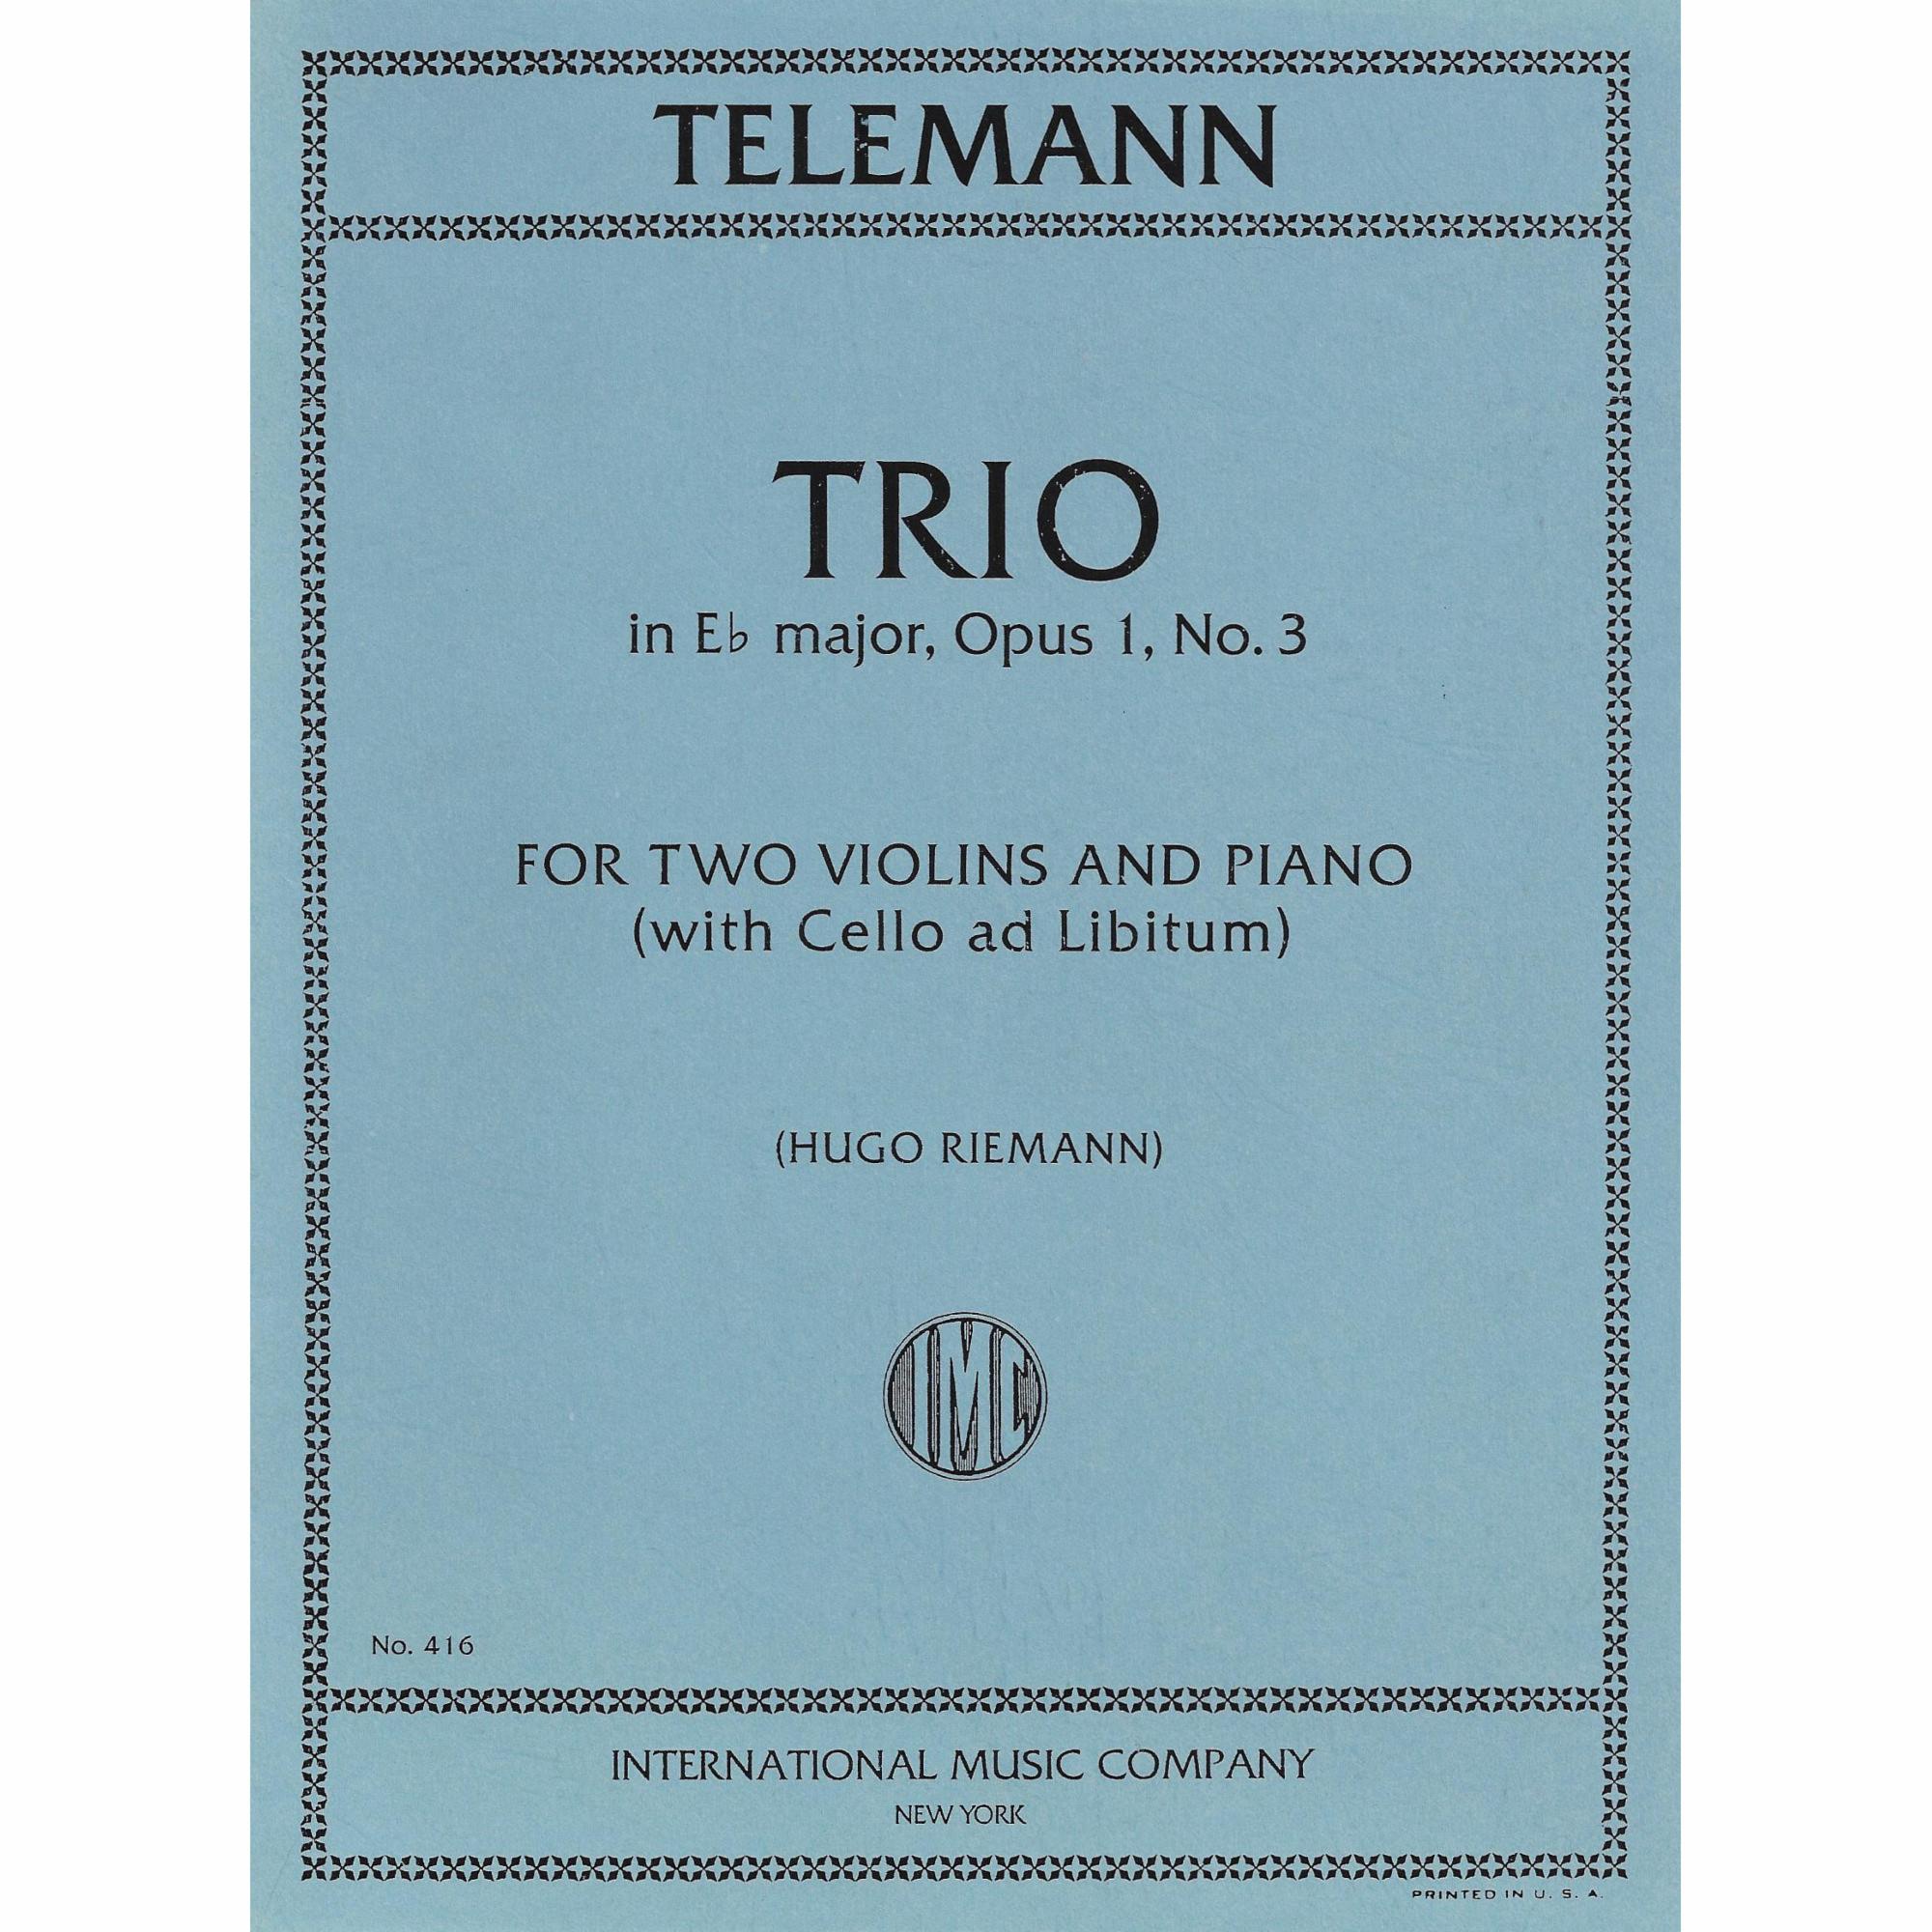 Telemann -- Trio in E-flat Major, Op. 1, No. 3 for Two Violins and Piano